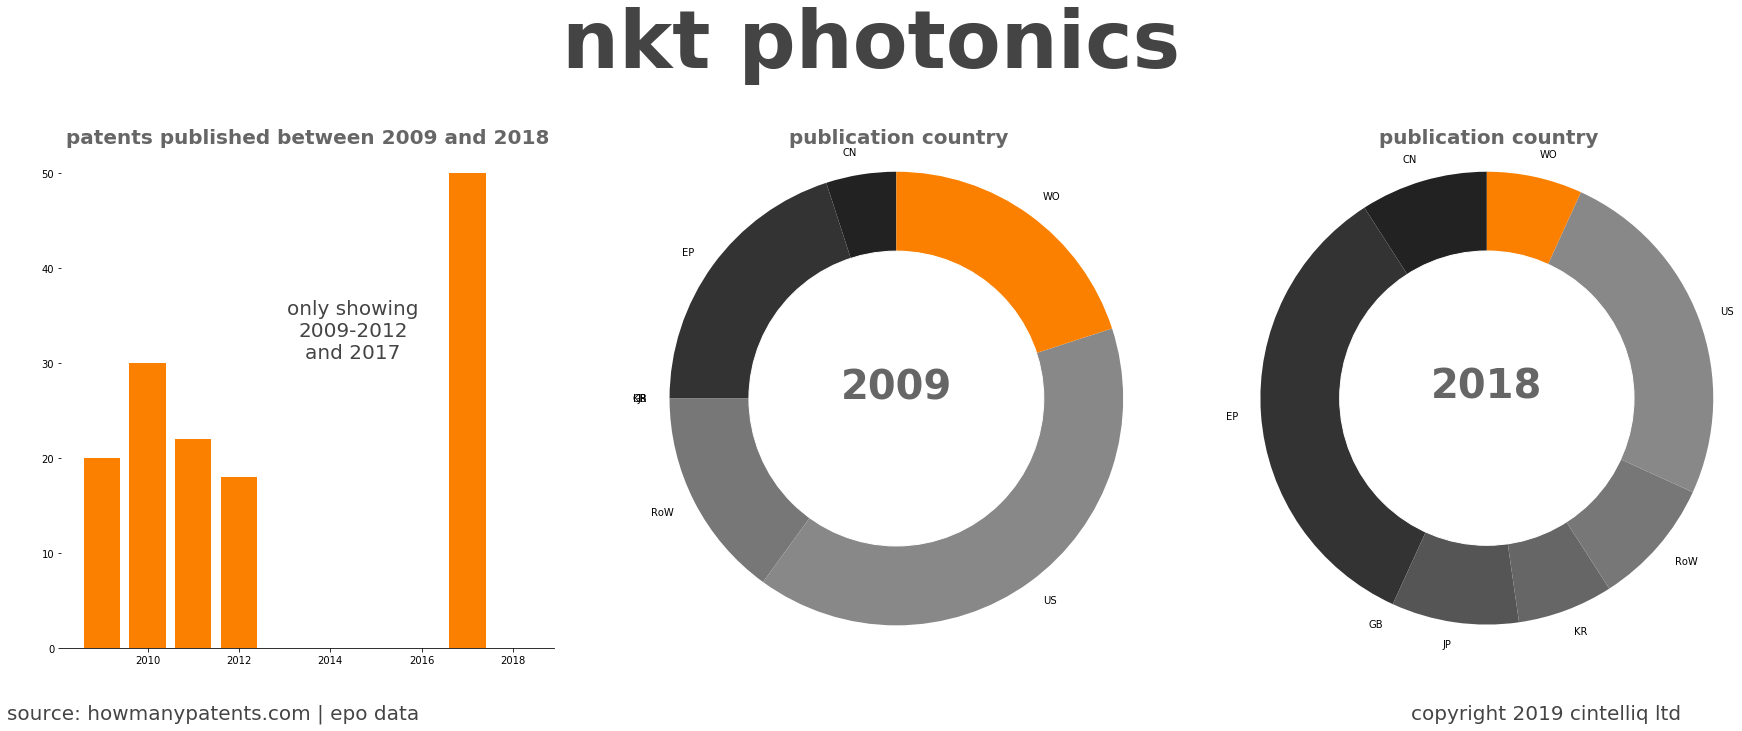 summary of patents for Nkt Photonics